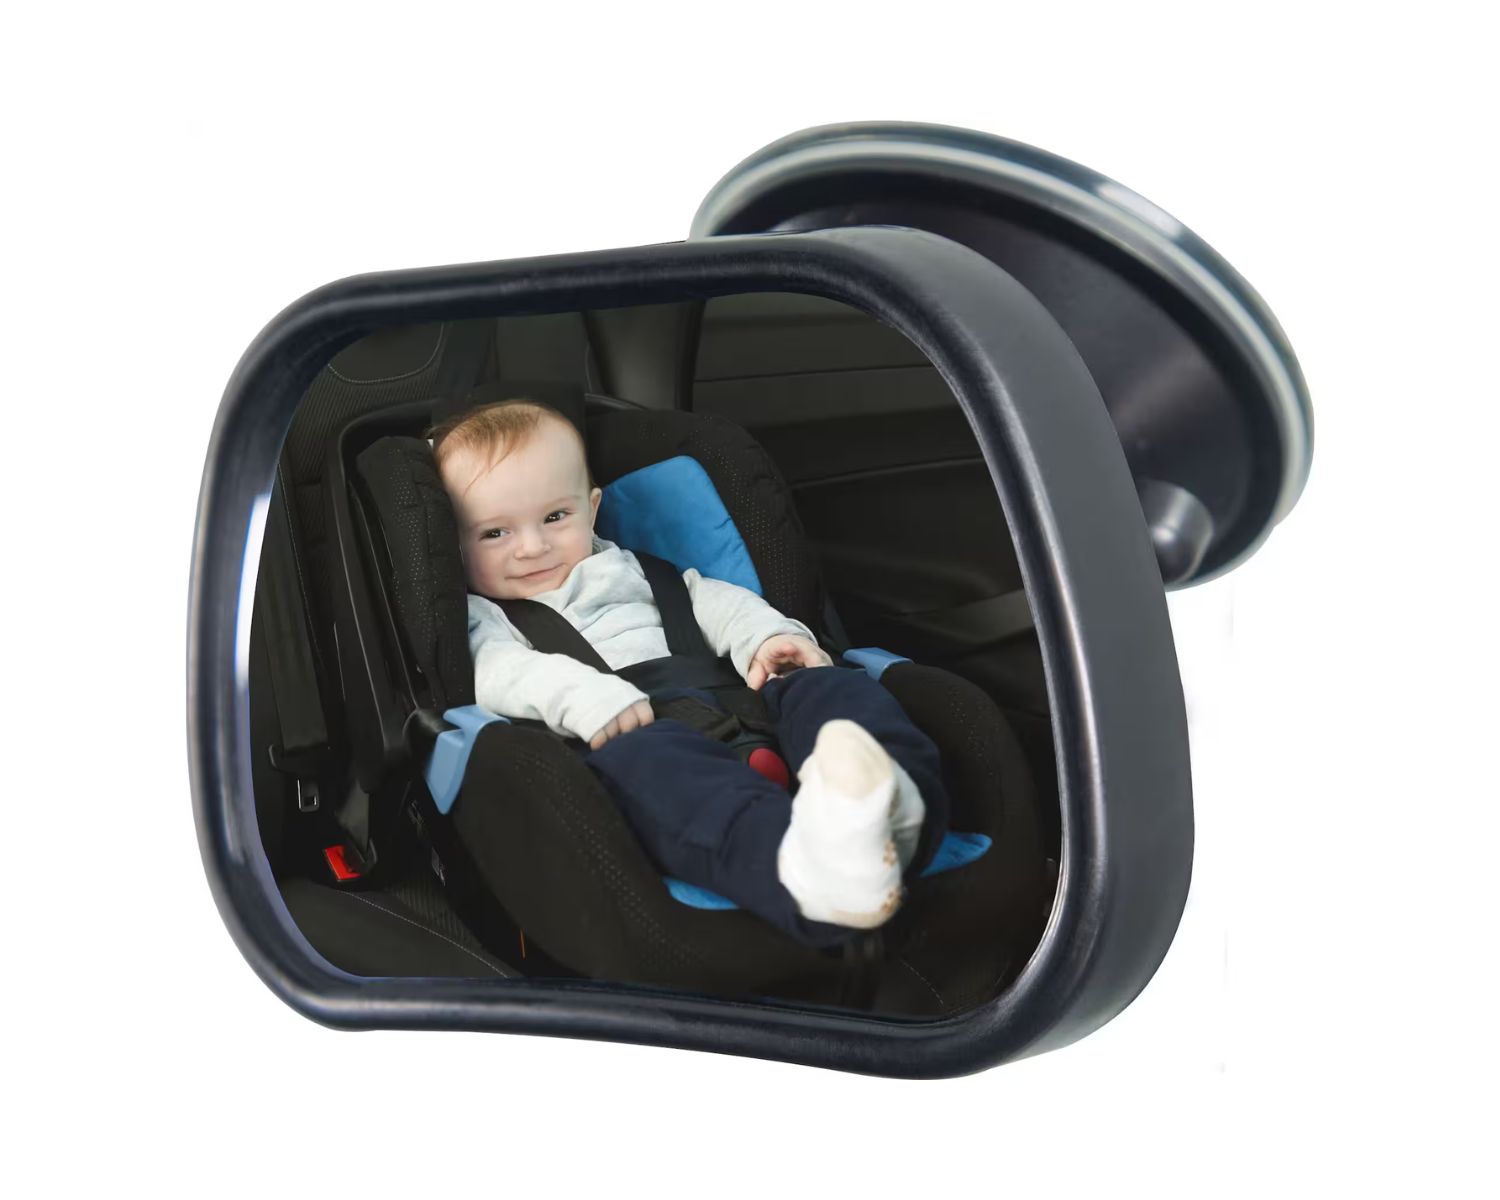 Review: Baby Car Mirror - No Headrest Needed